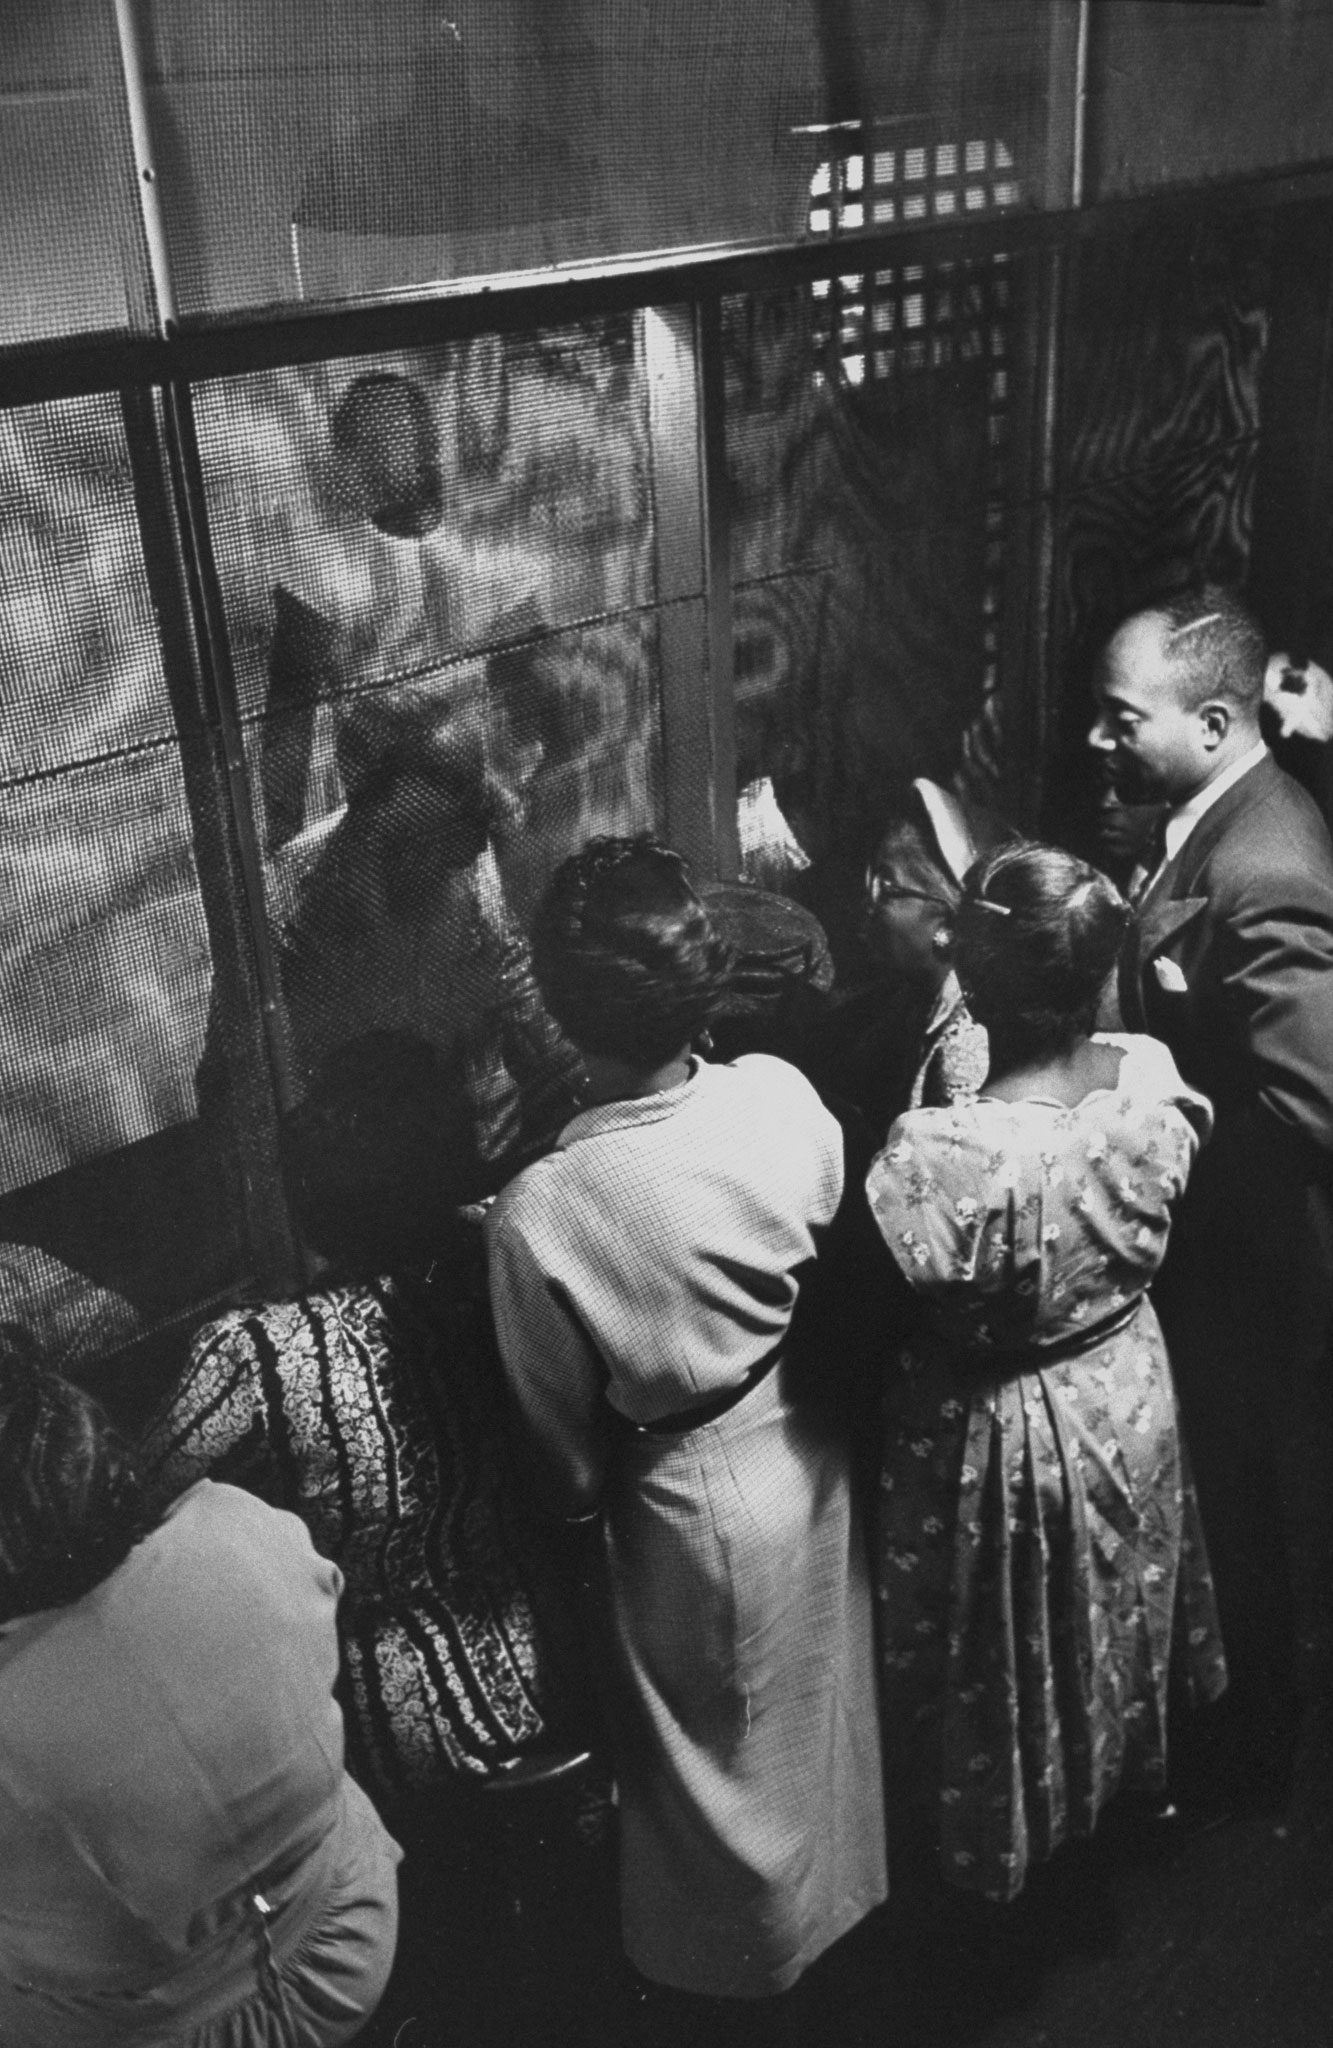 Prisoners talk through heavy screens to friends and relatives, Tennessee State Penitentiary, 1953.